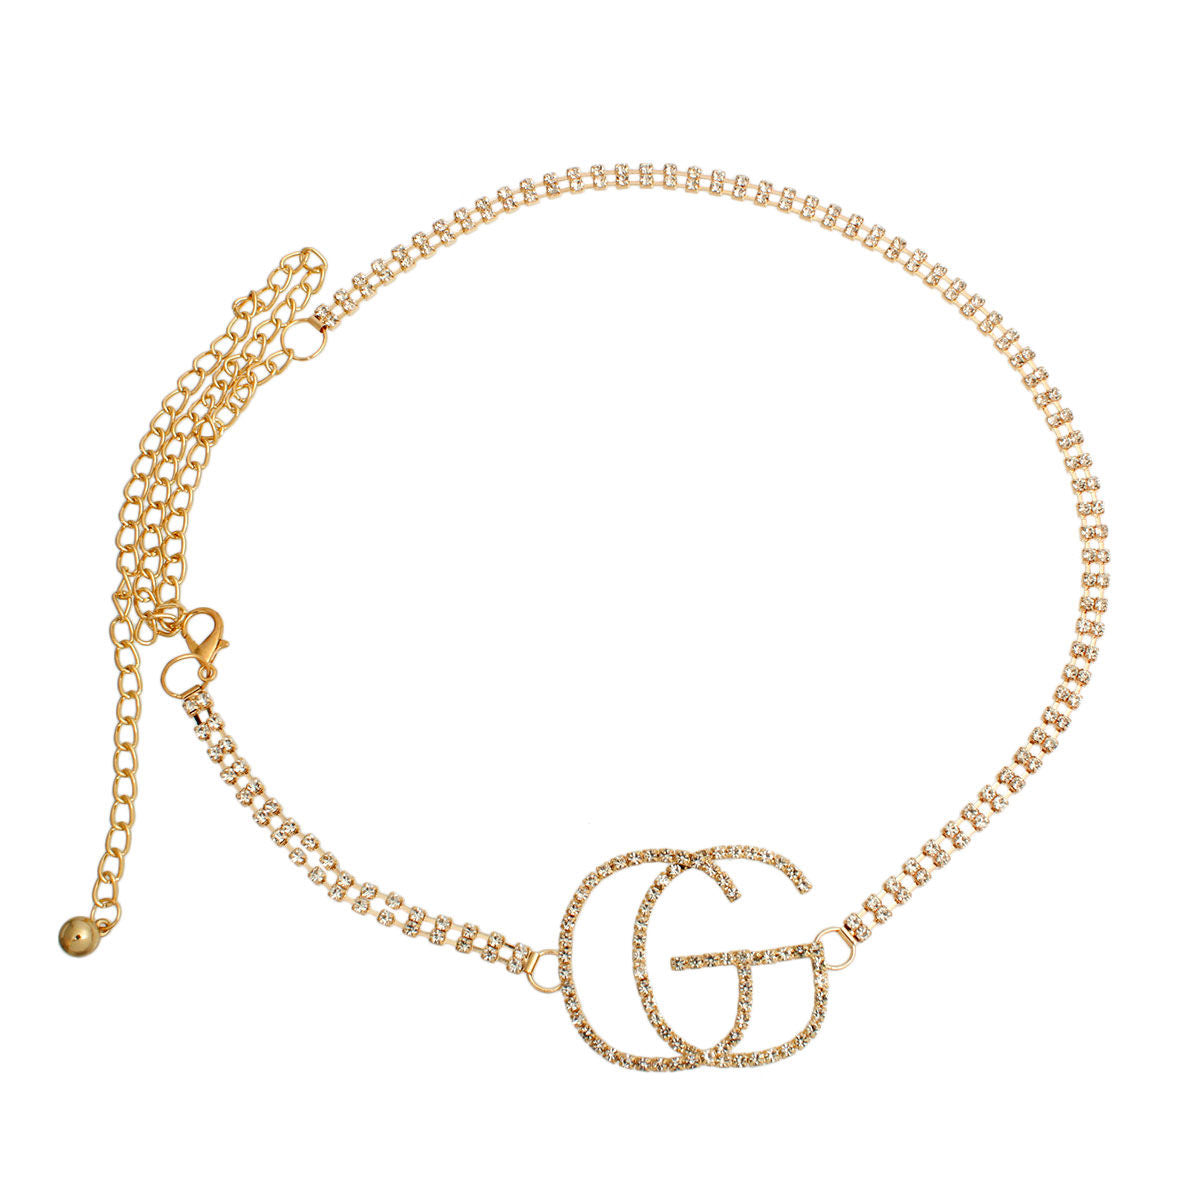 Gold Embellished Double G Chain Belt